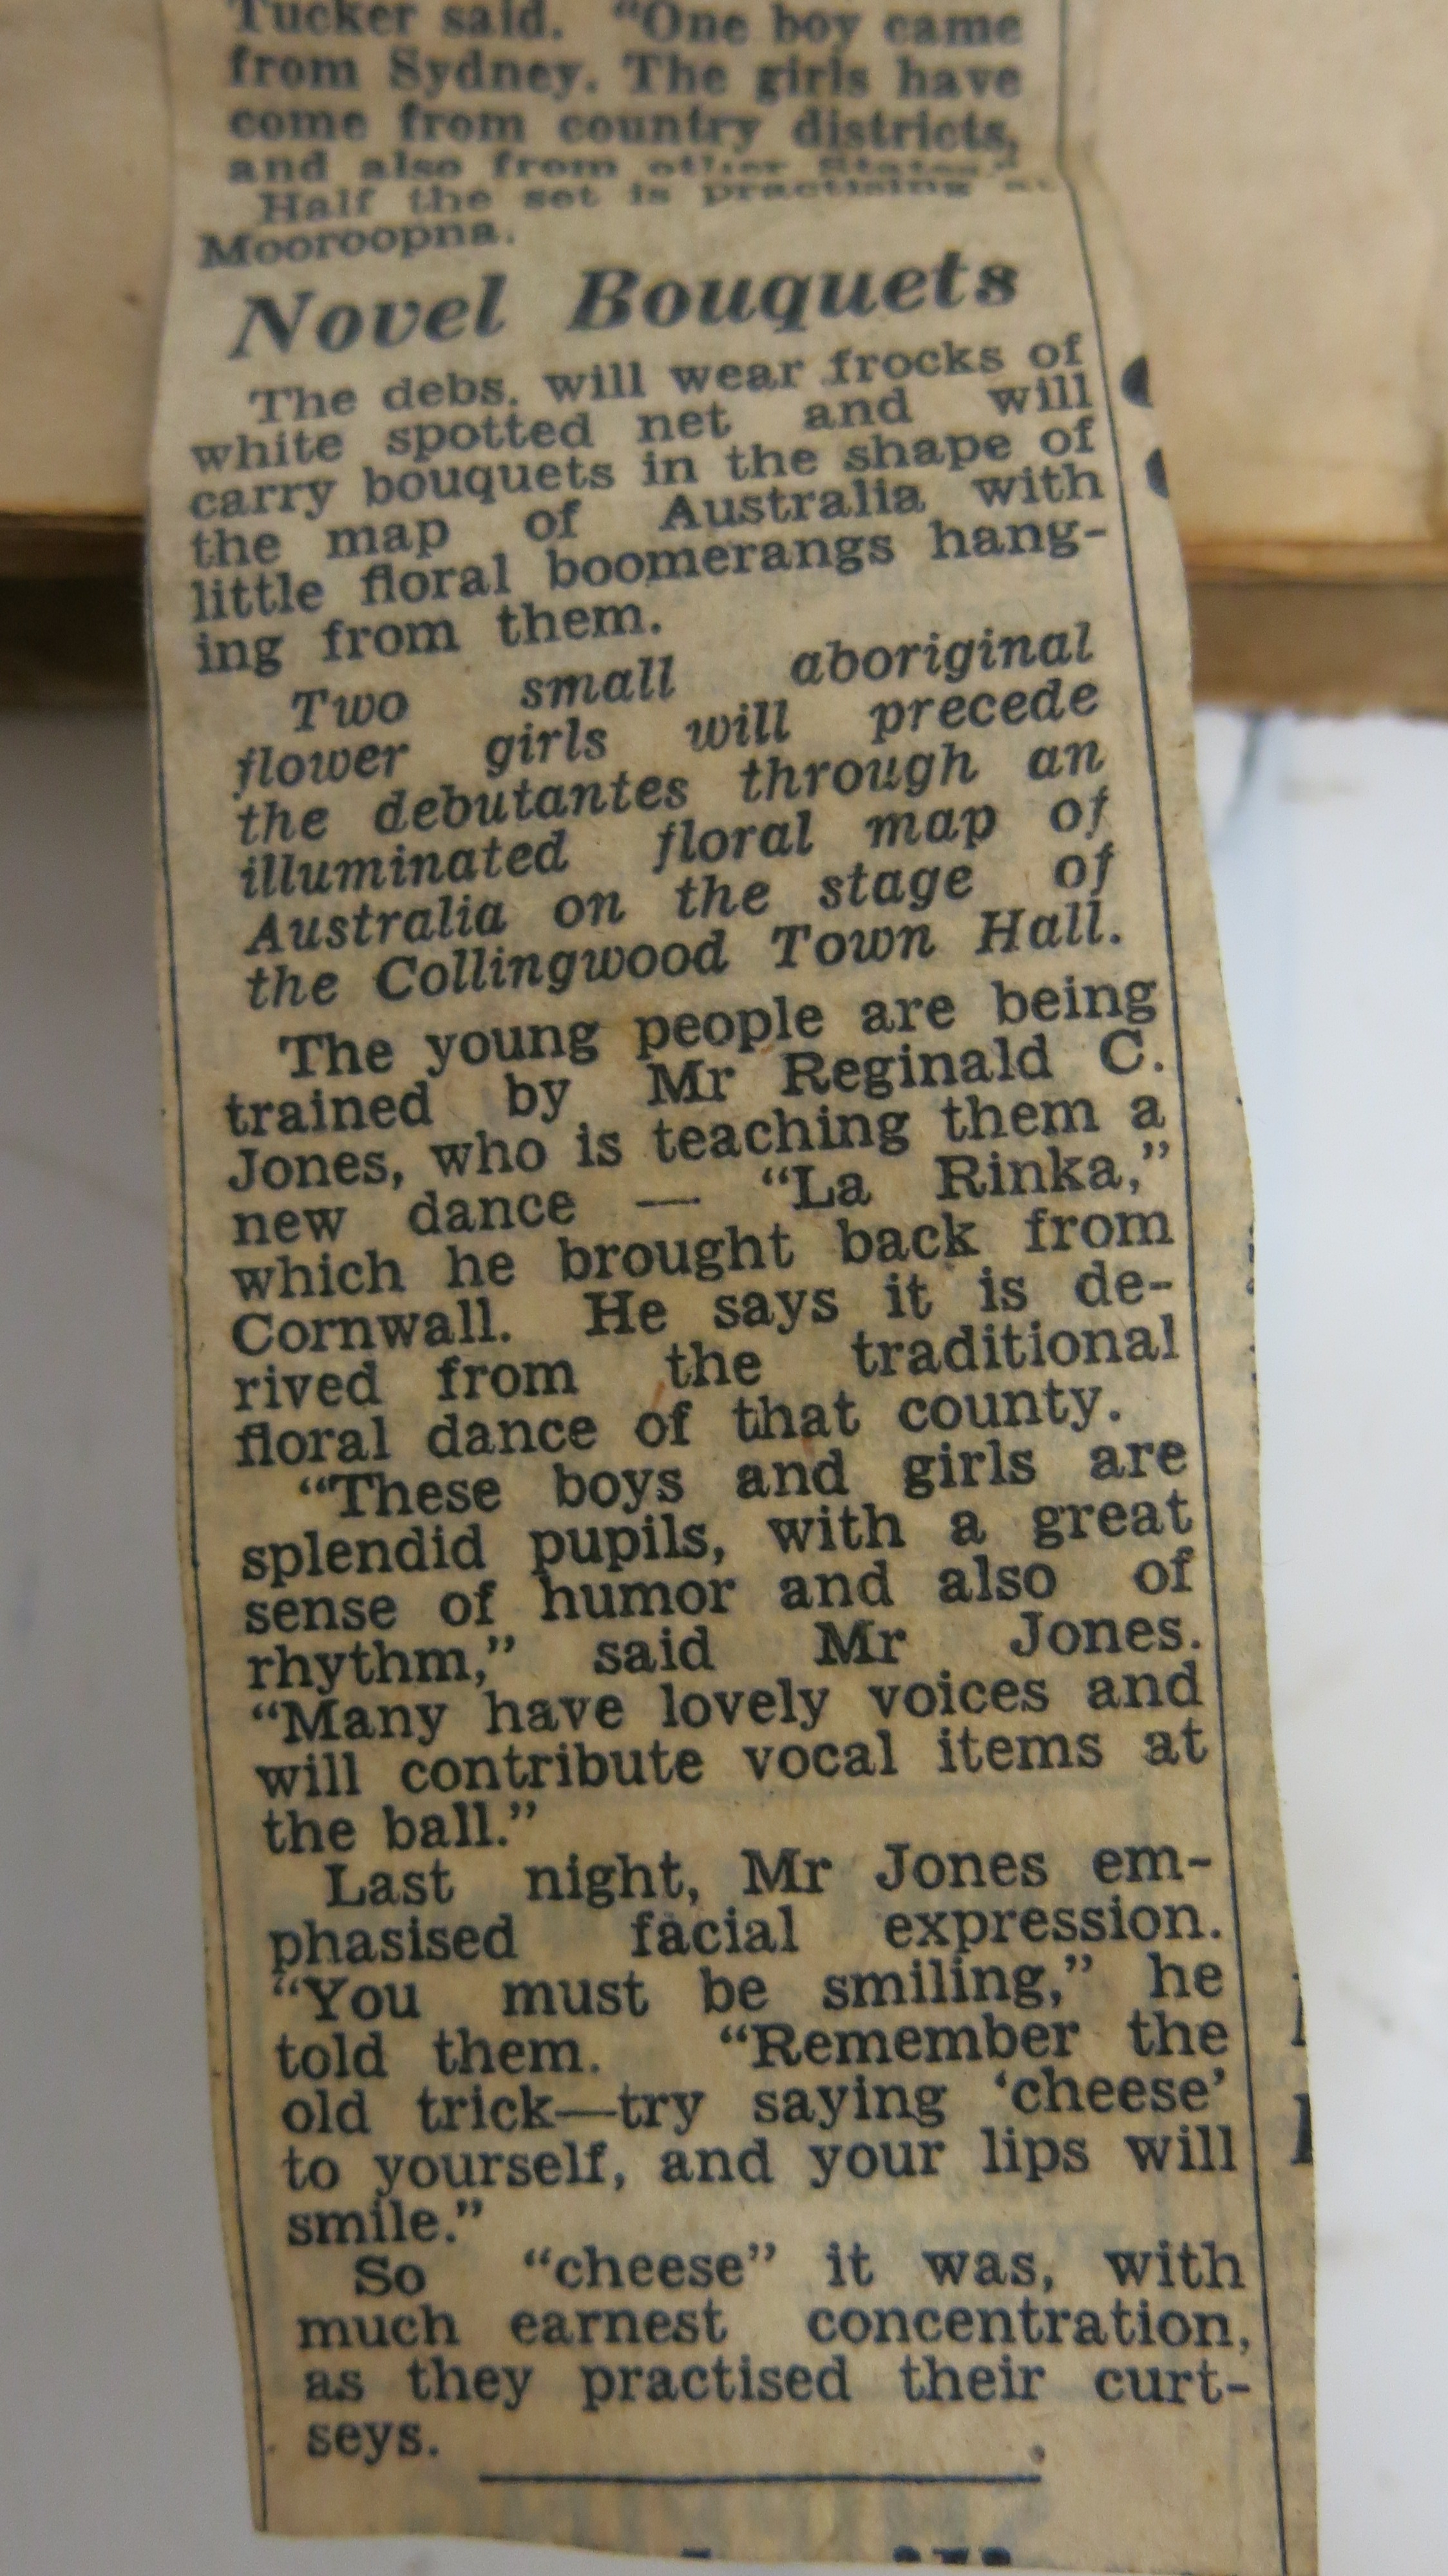 A clipping from a seven-decade old newspaper.